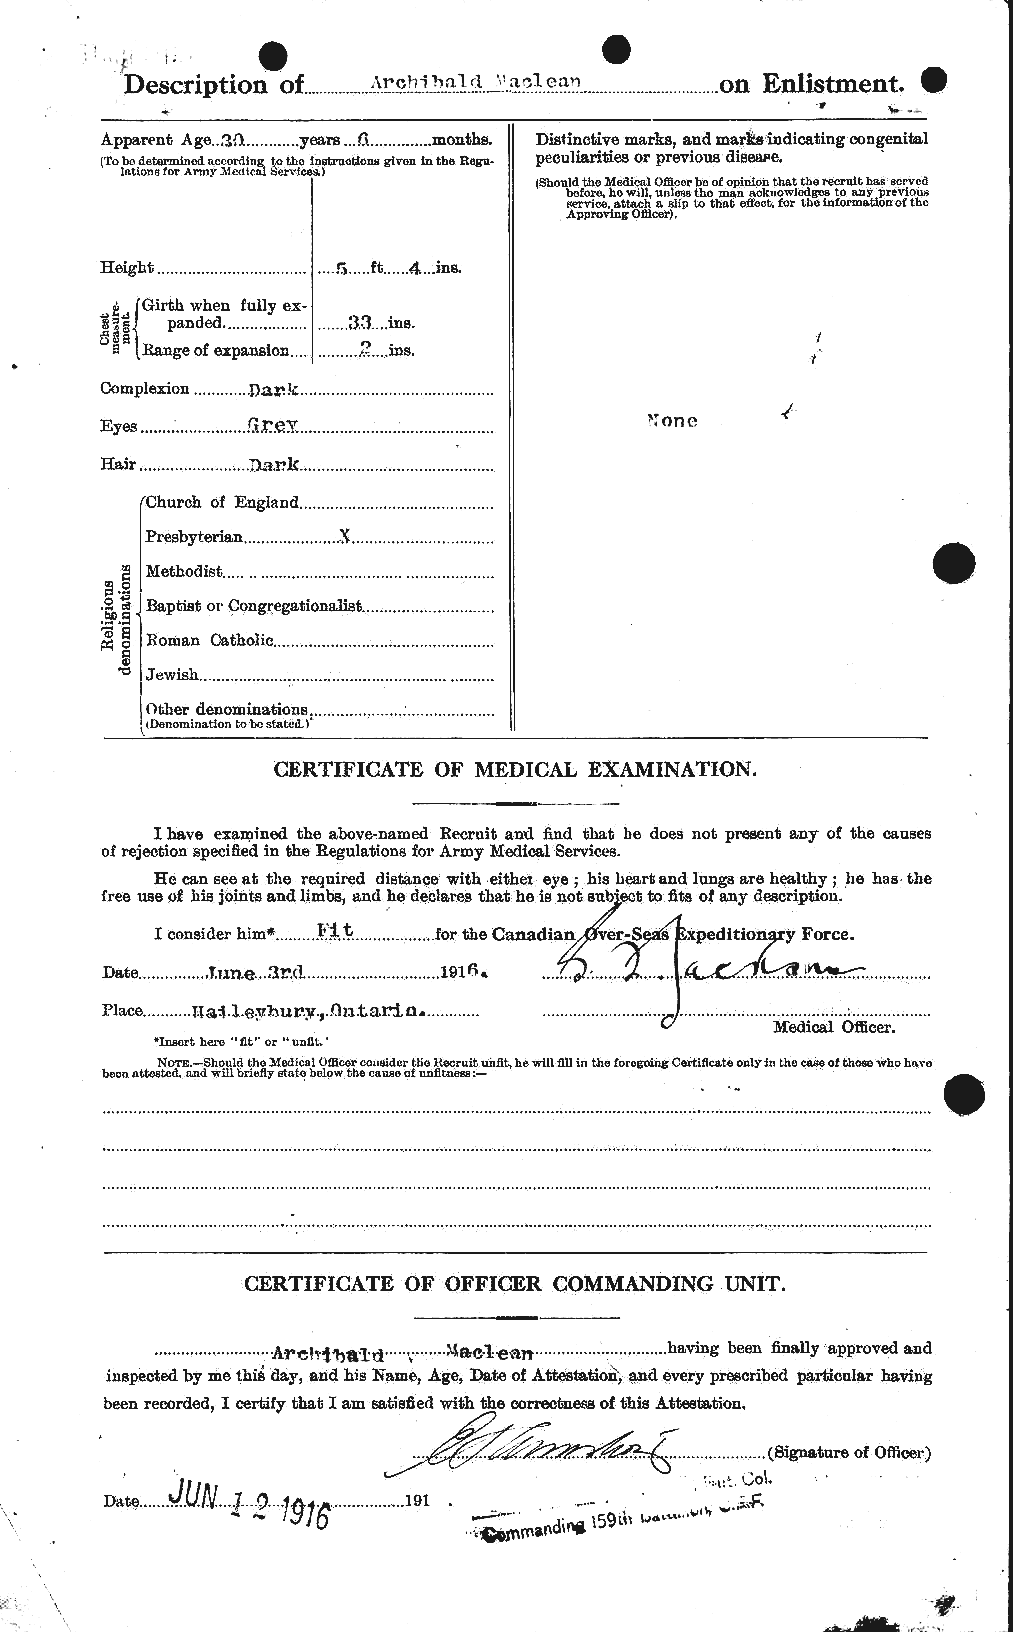 Personnel Records of the First World War - CEF 532837b